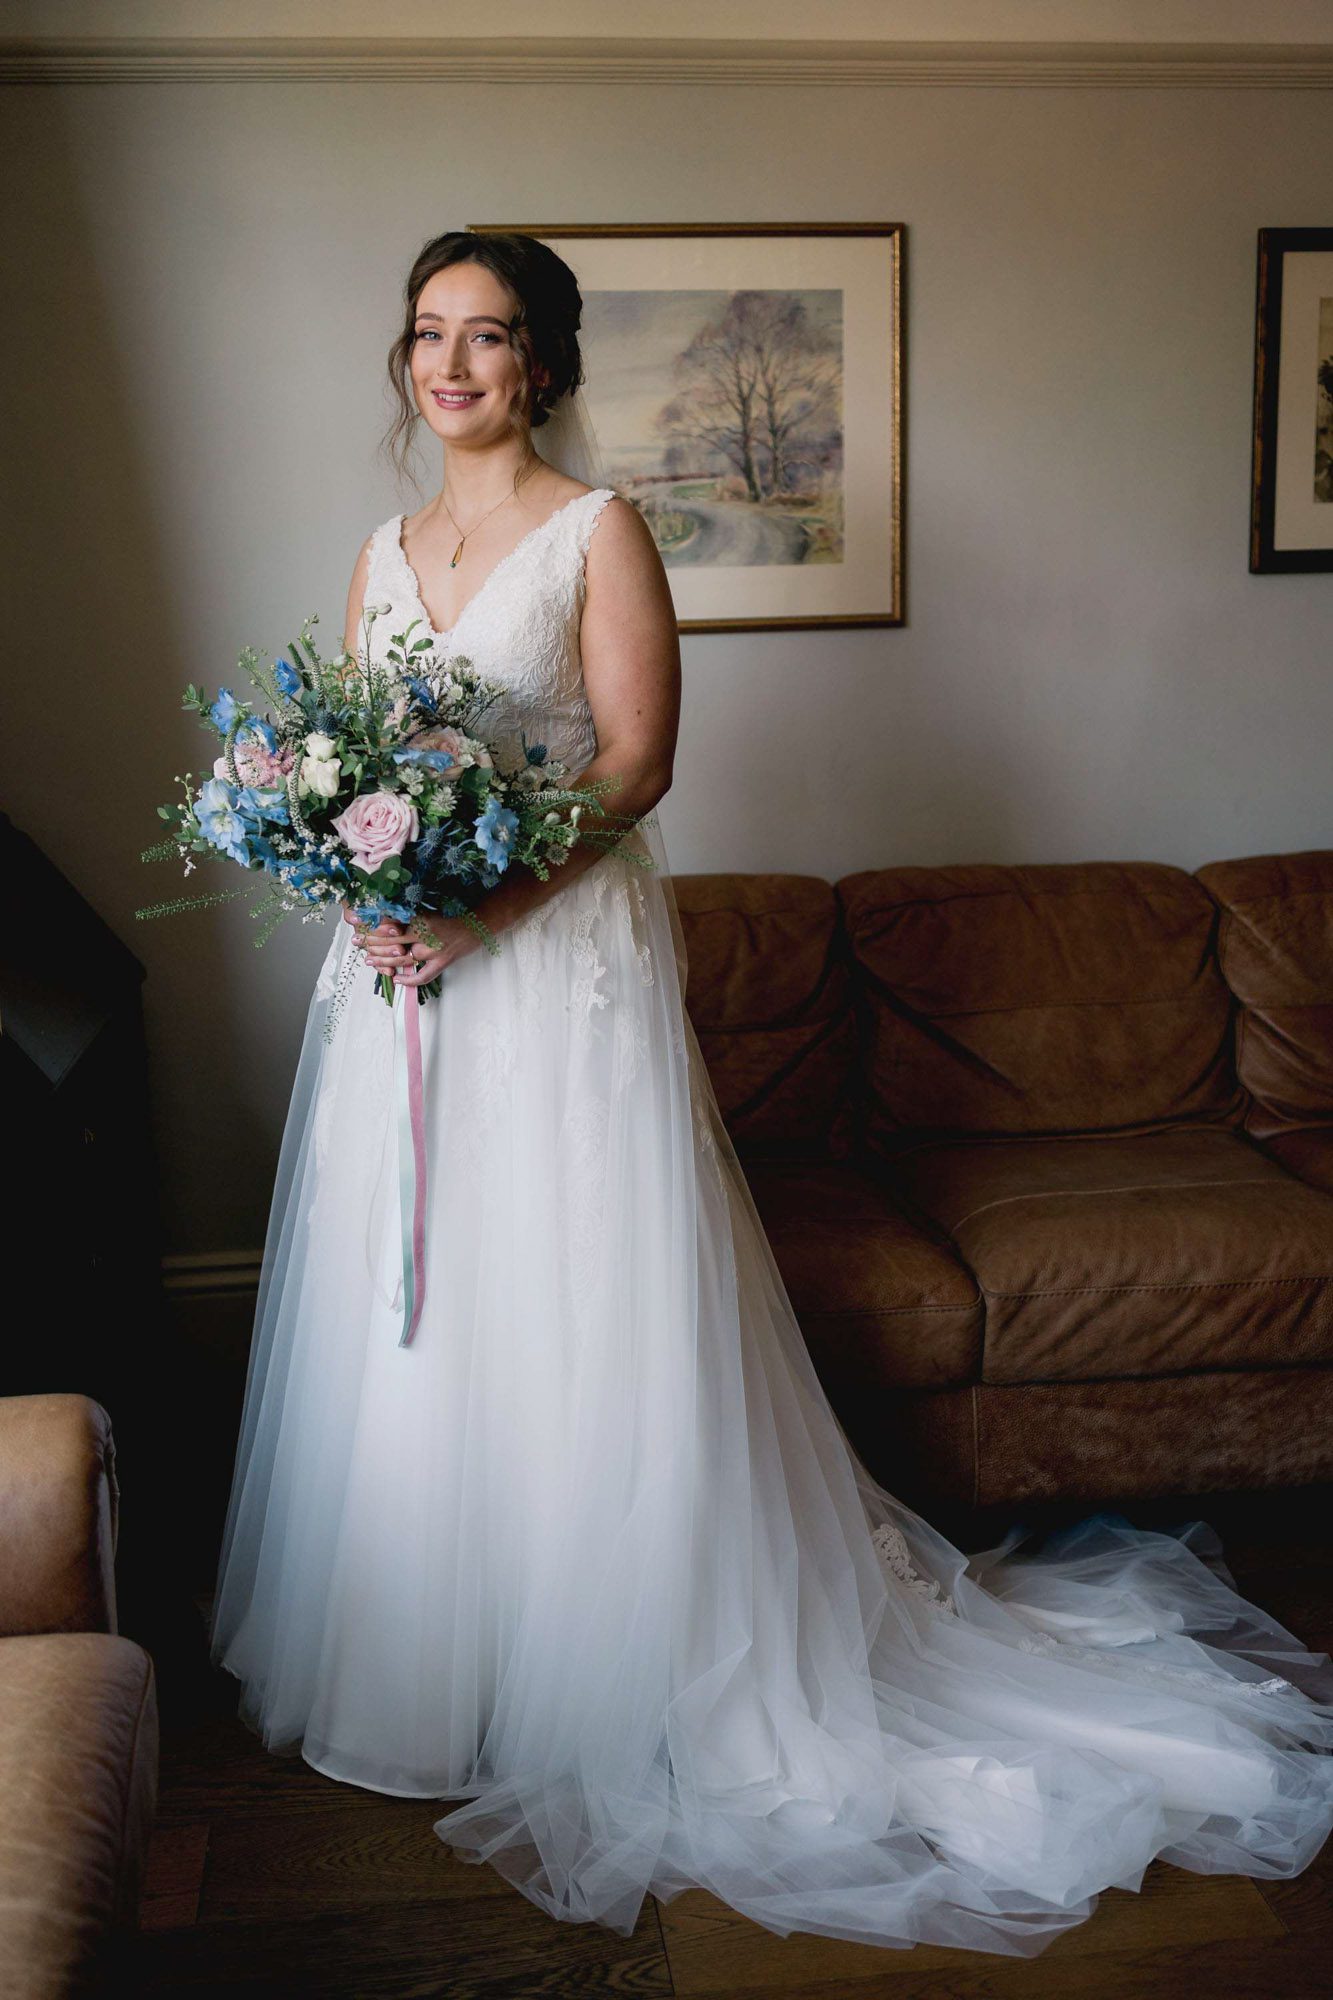 A bride in a beautiful wedding dress holding her bouquet of flowers ready for her wedding at Salomons Estate in Tunbridge Wells.